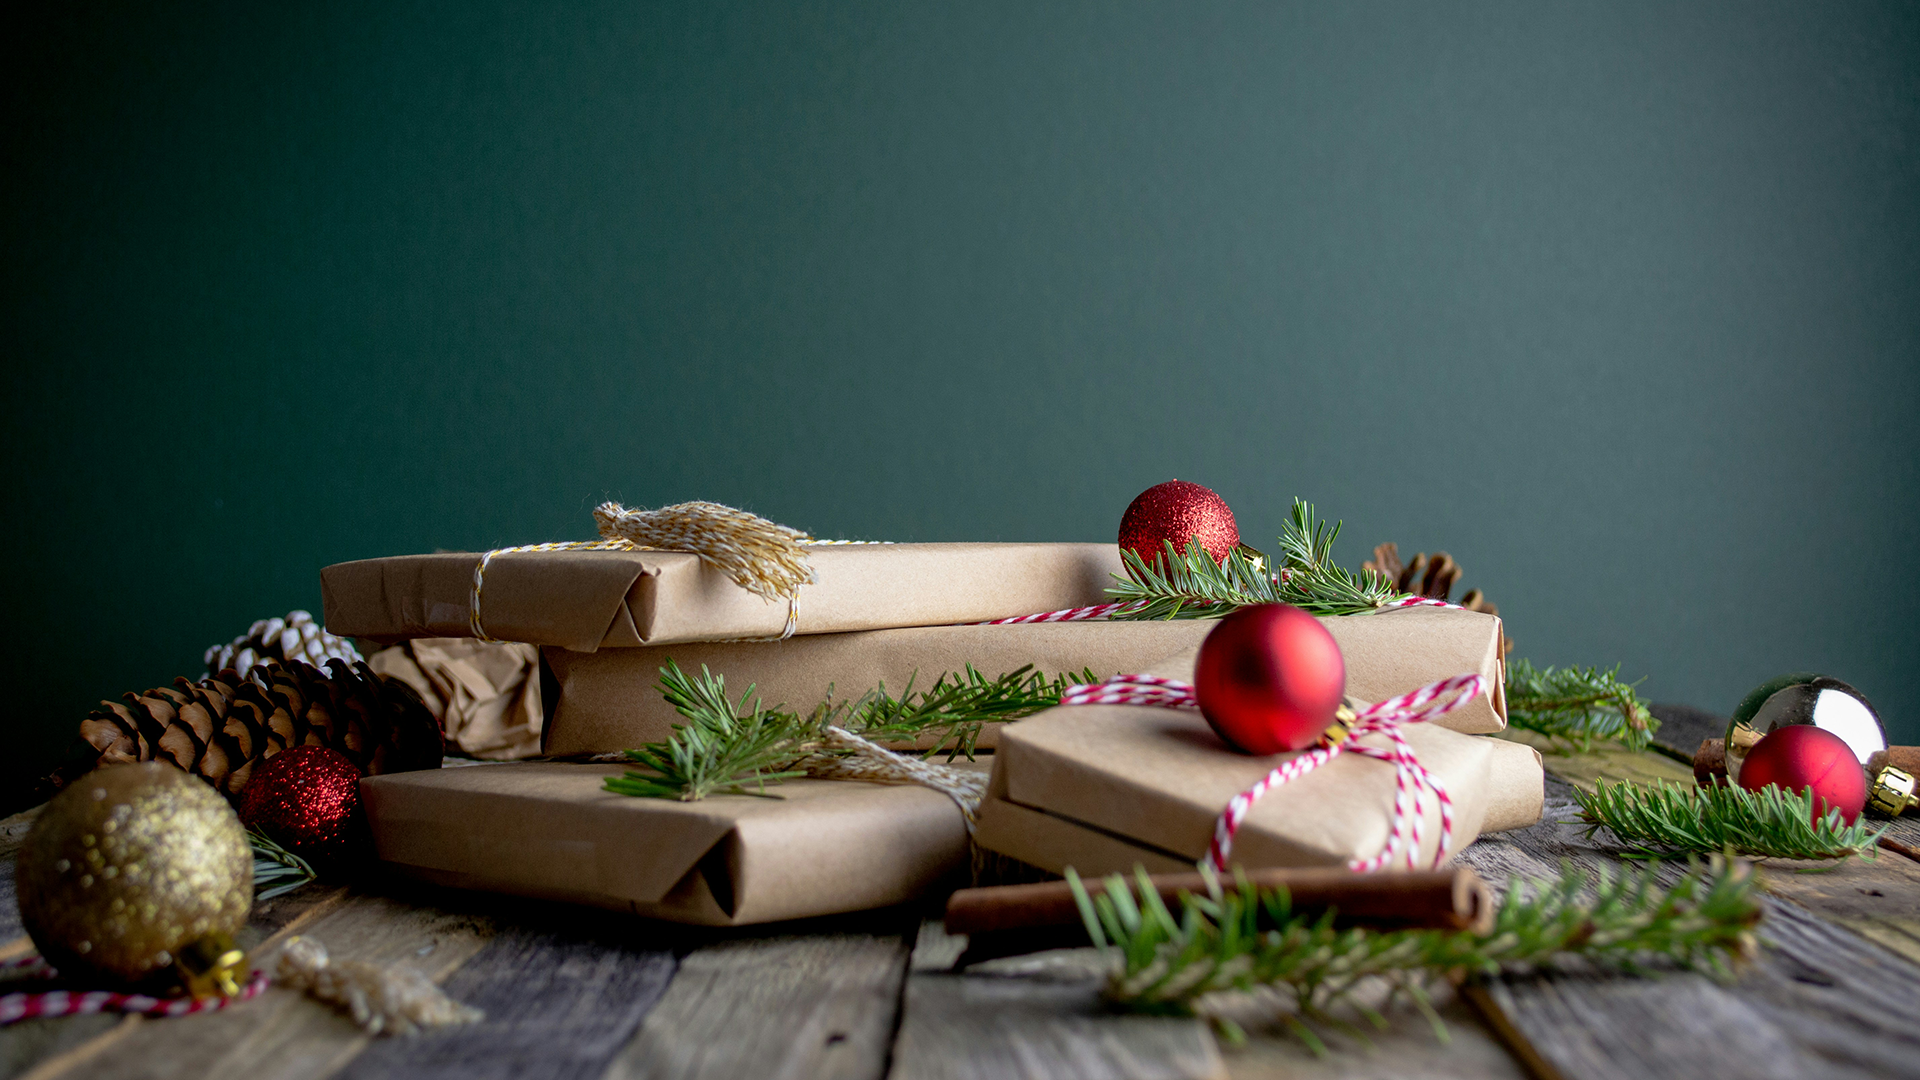 7 Ways to Spread Festive Cheer in your Community